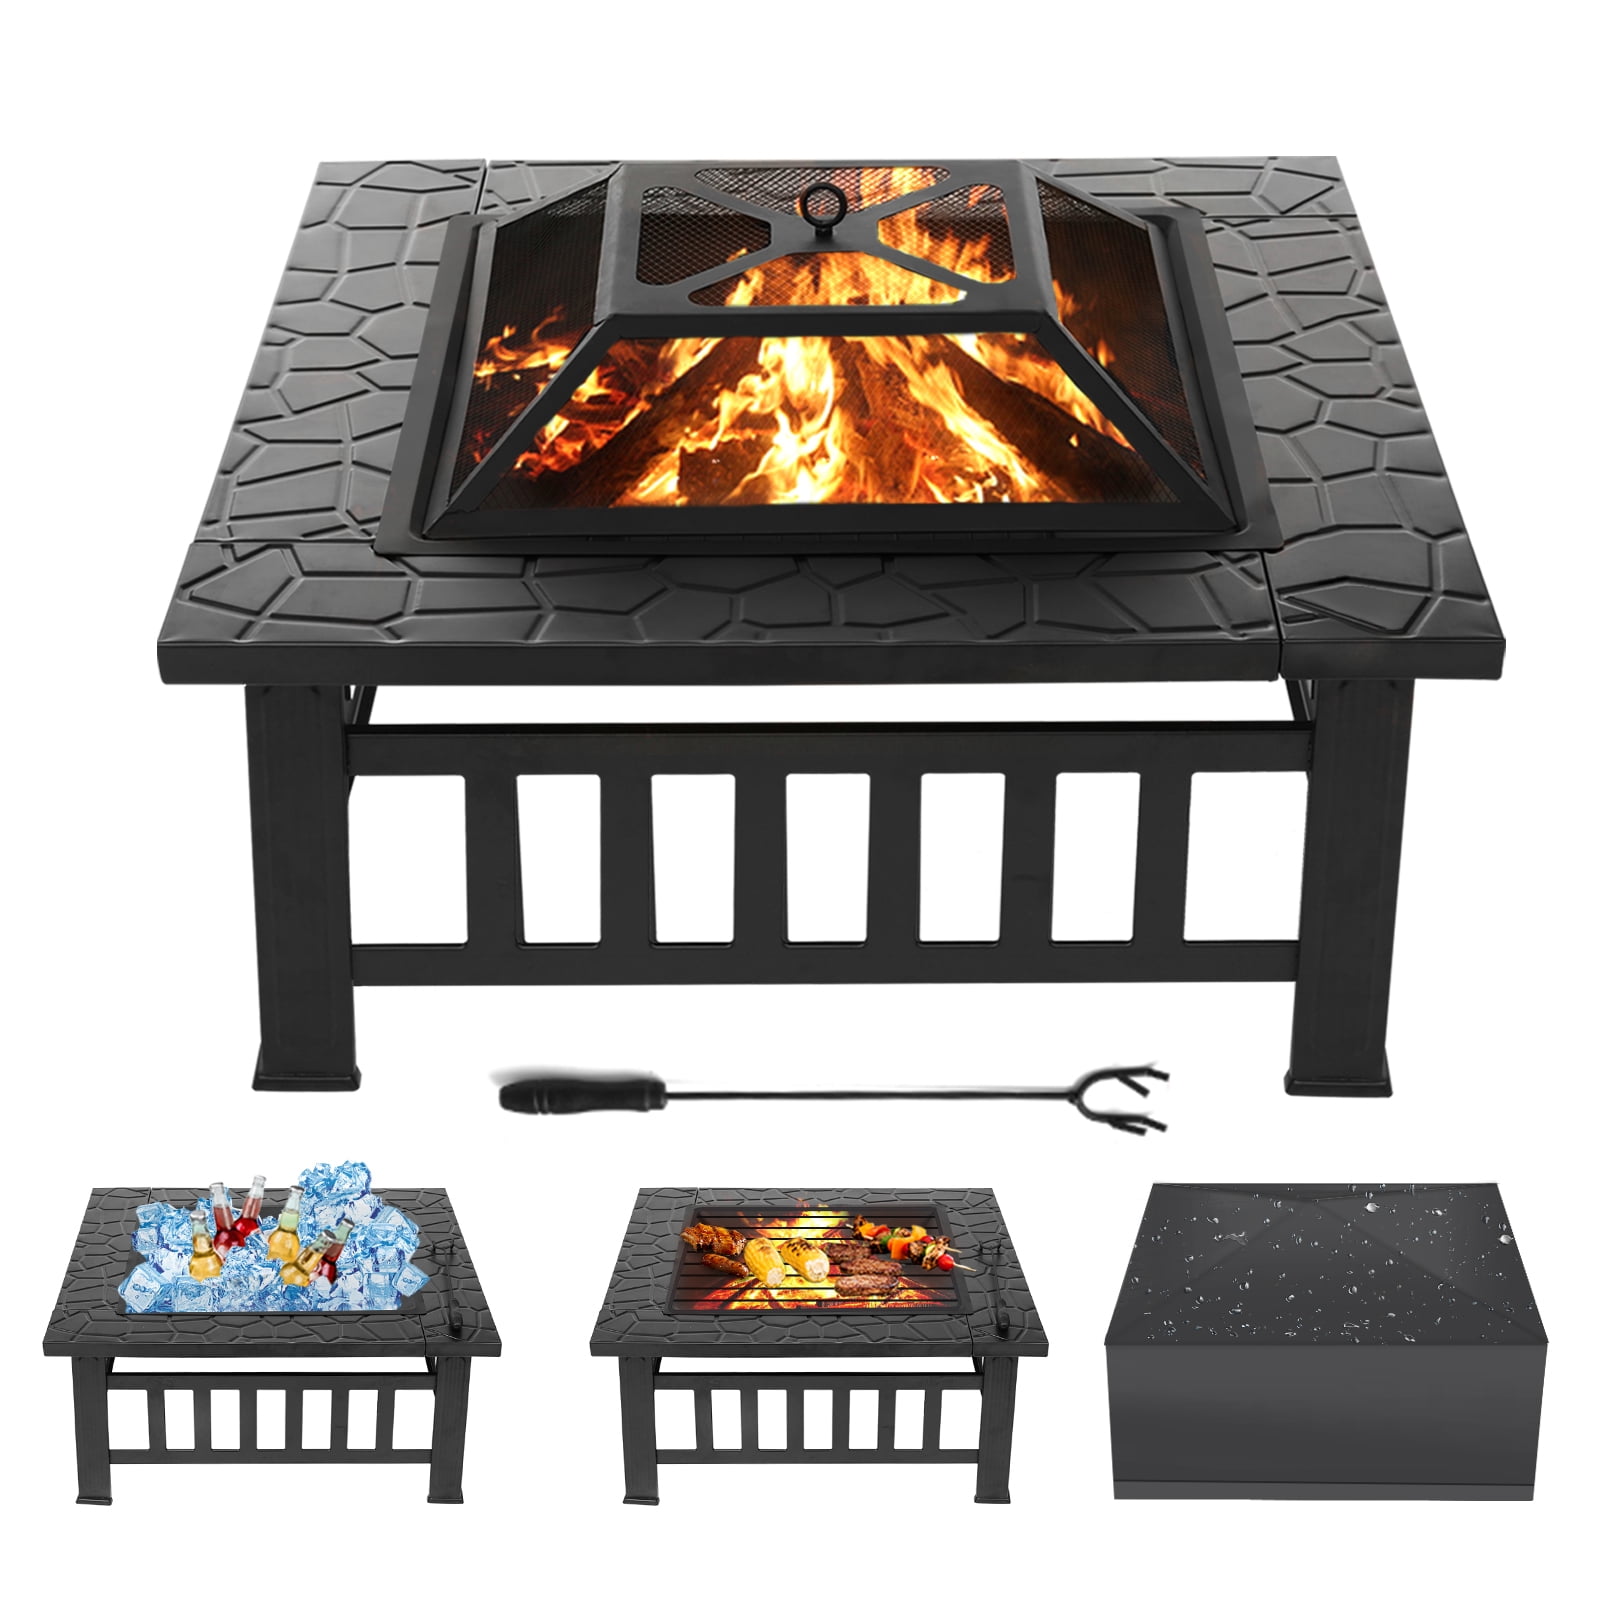 Upgraded Fire Pit BBQ Firepit Garden Square Table Stove Patio Heater with Grill 